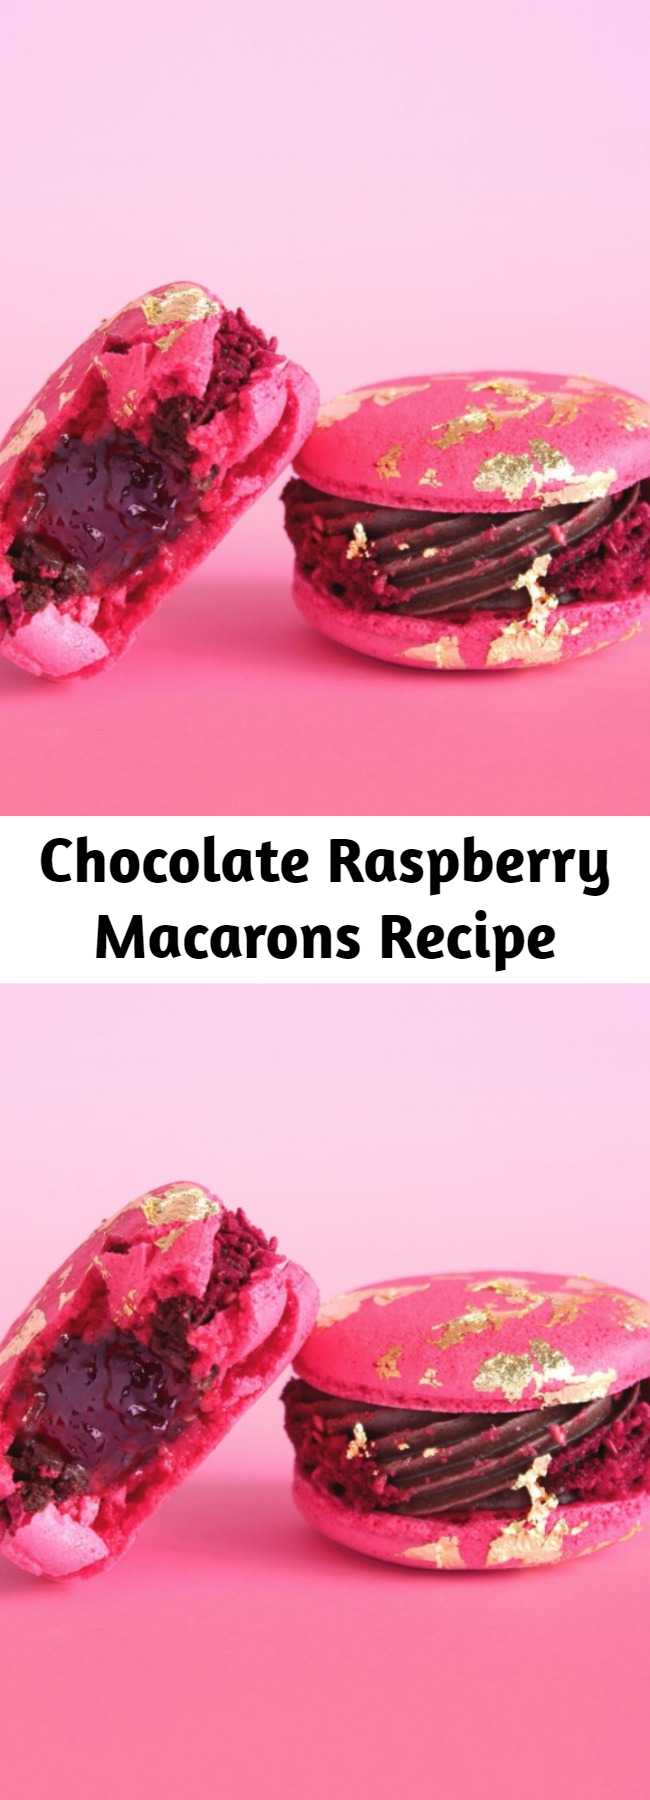 Chocolate Raspberry Macarons Recipe - All that glitters may not be gold, but these macarons are the exception.